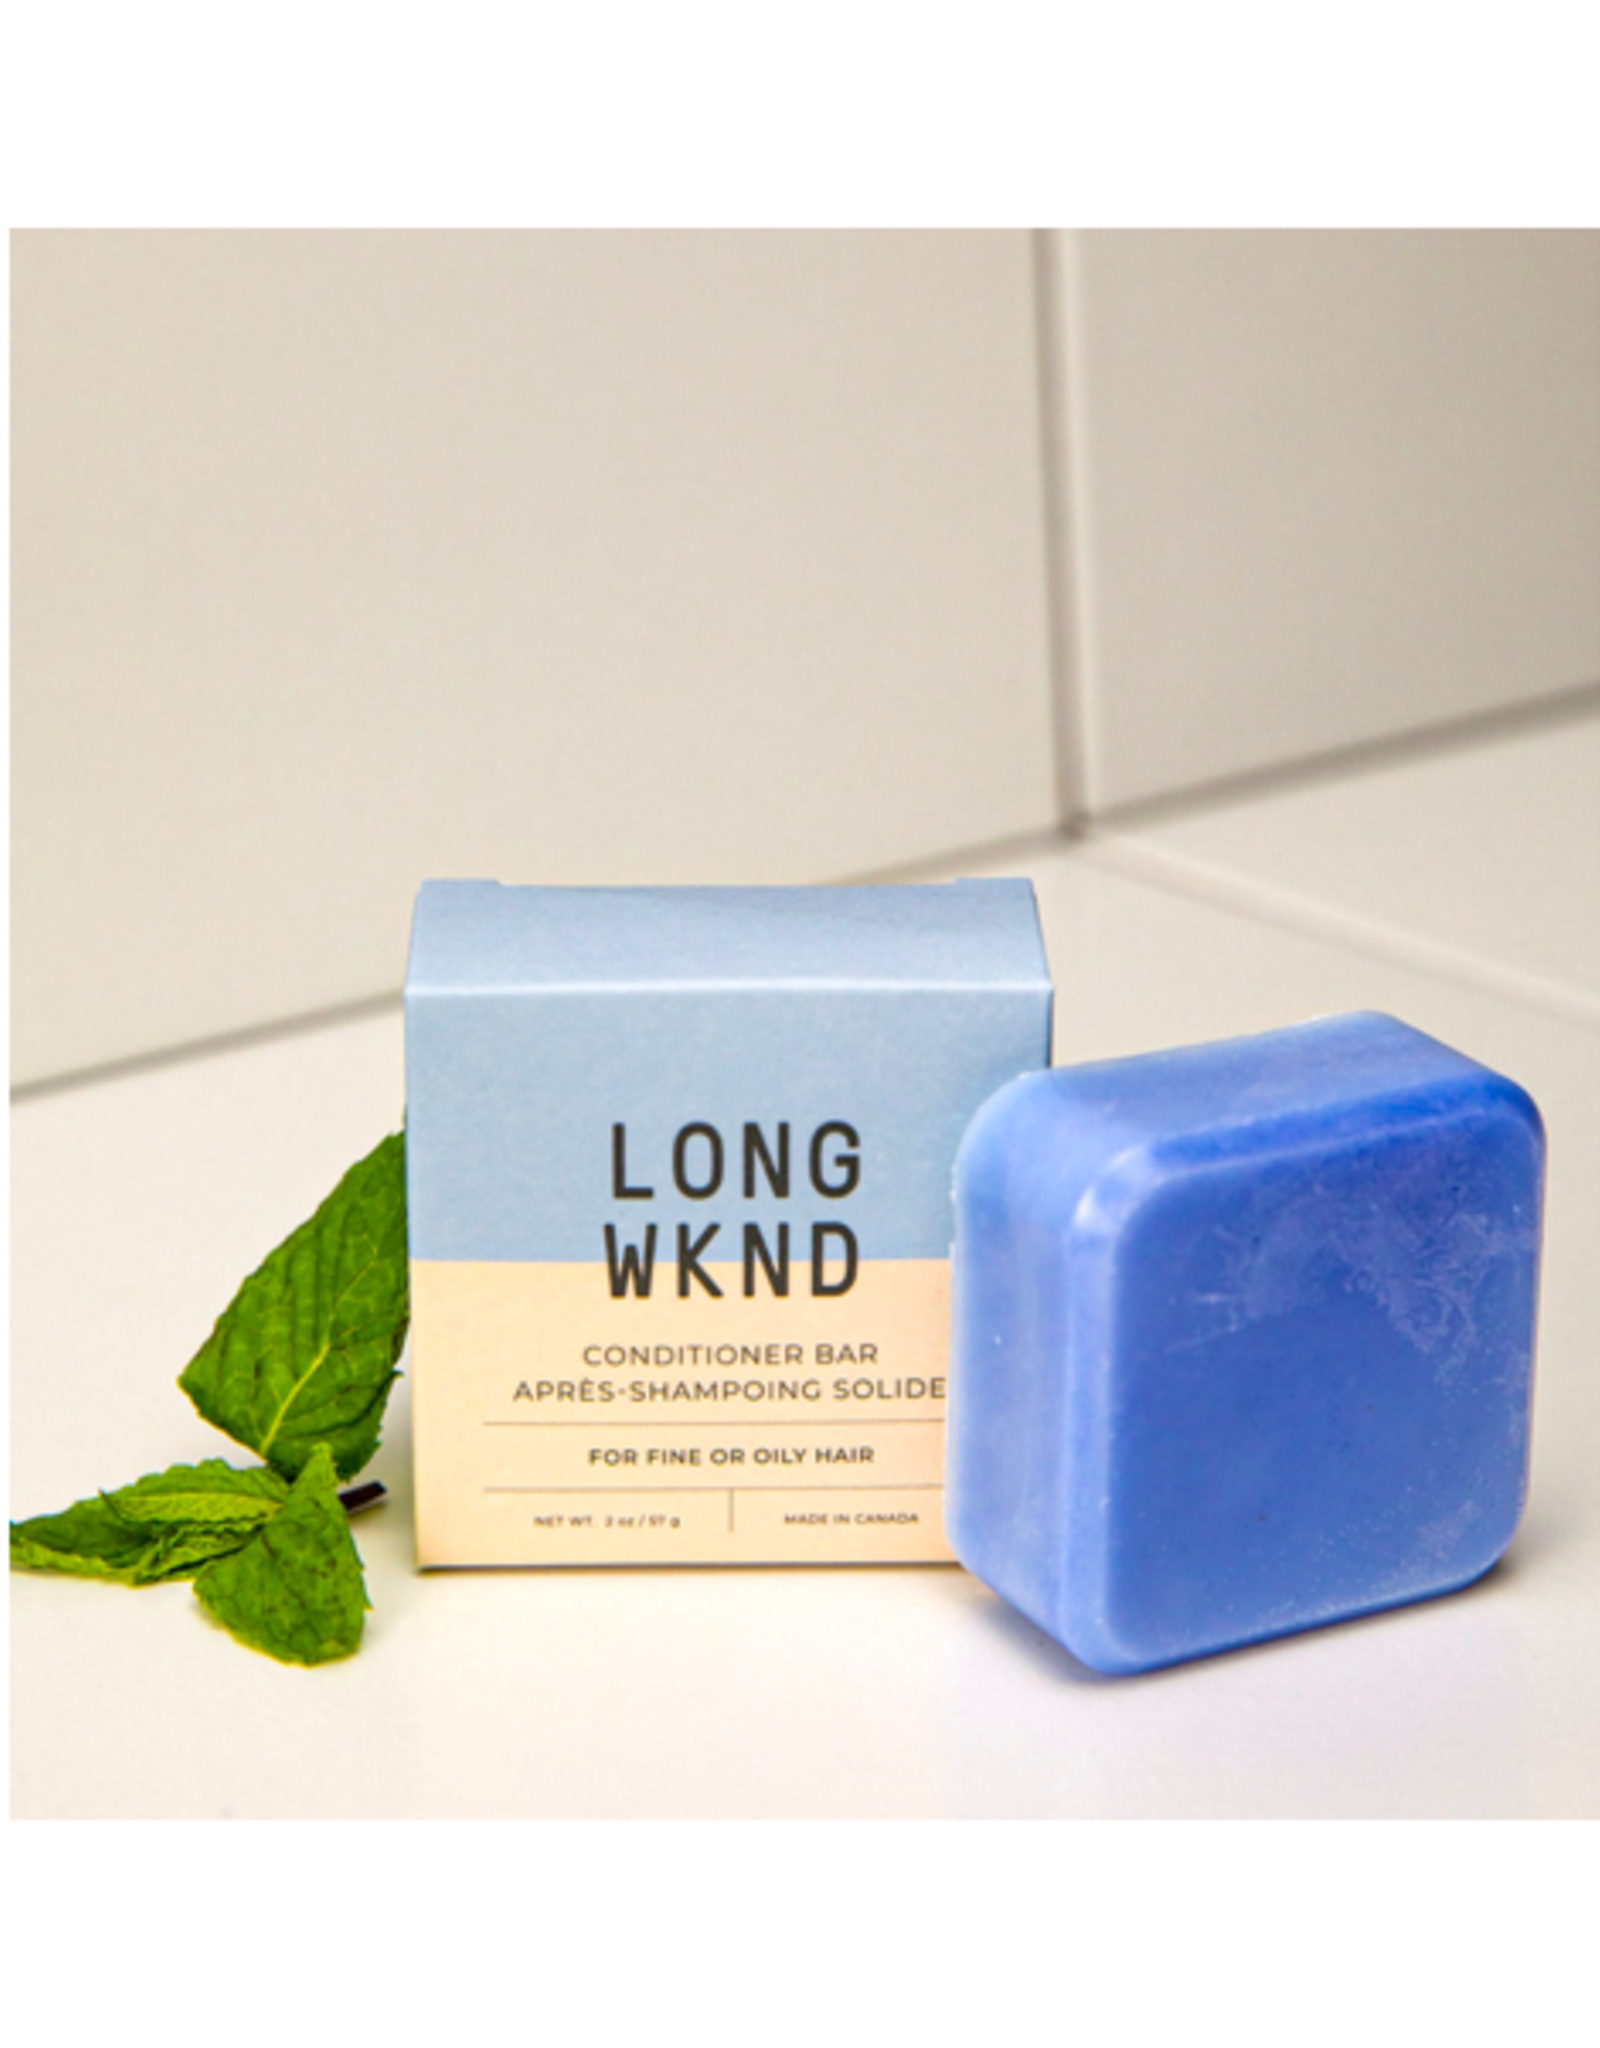 Long Wknd - Conditioner Bar / Soothe, 2oz